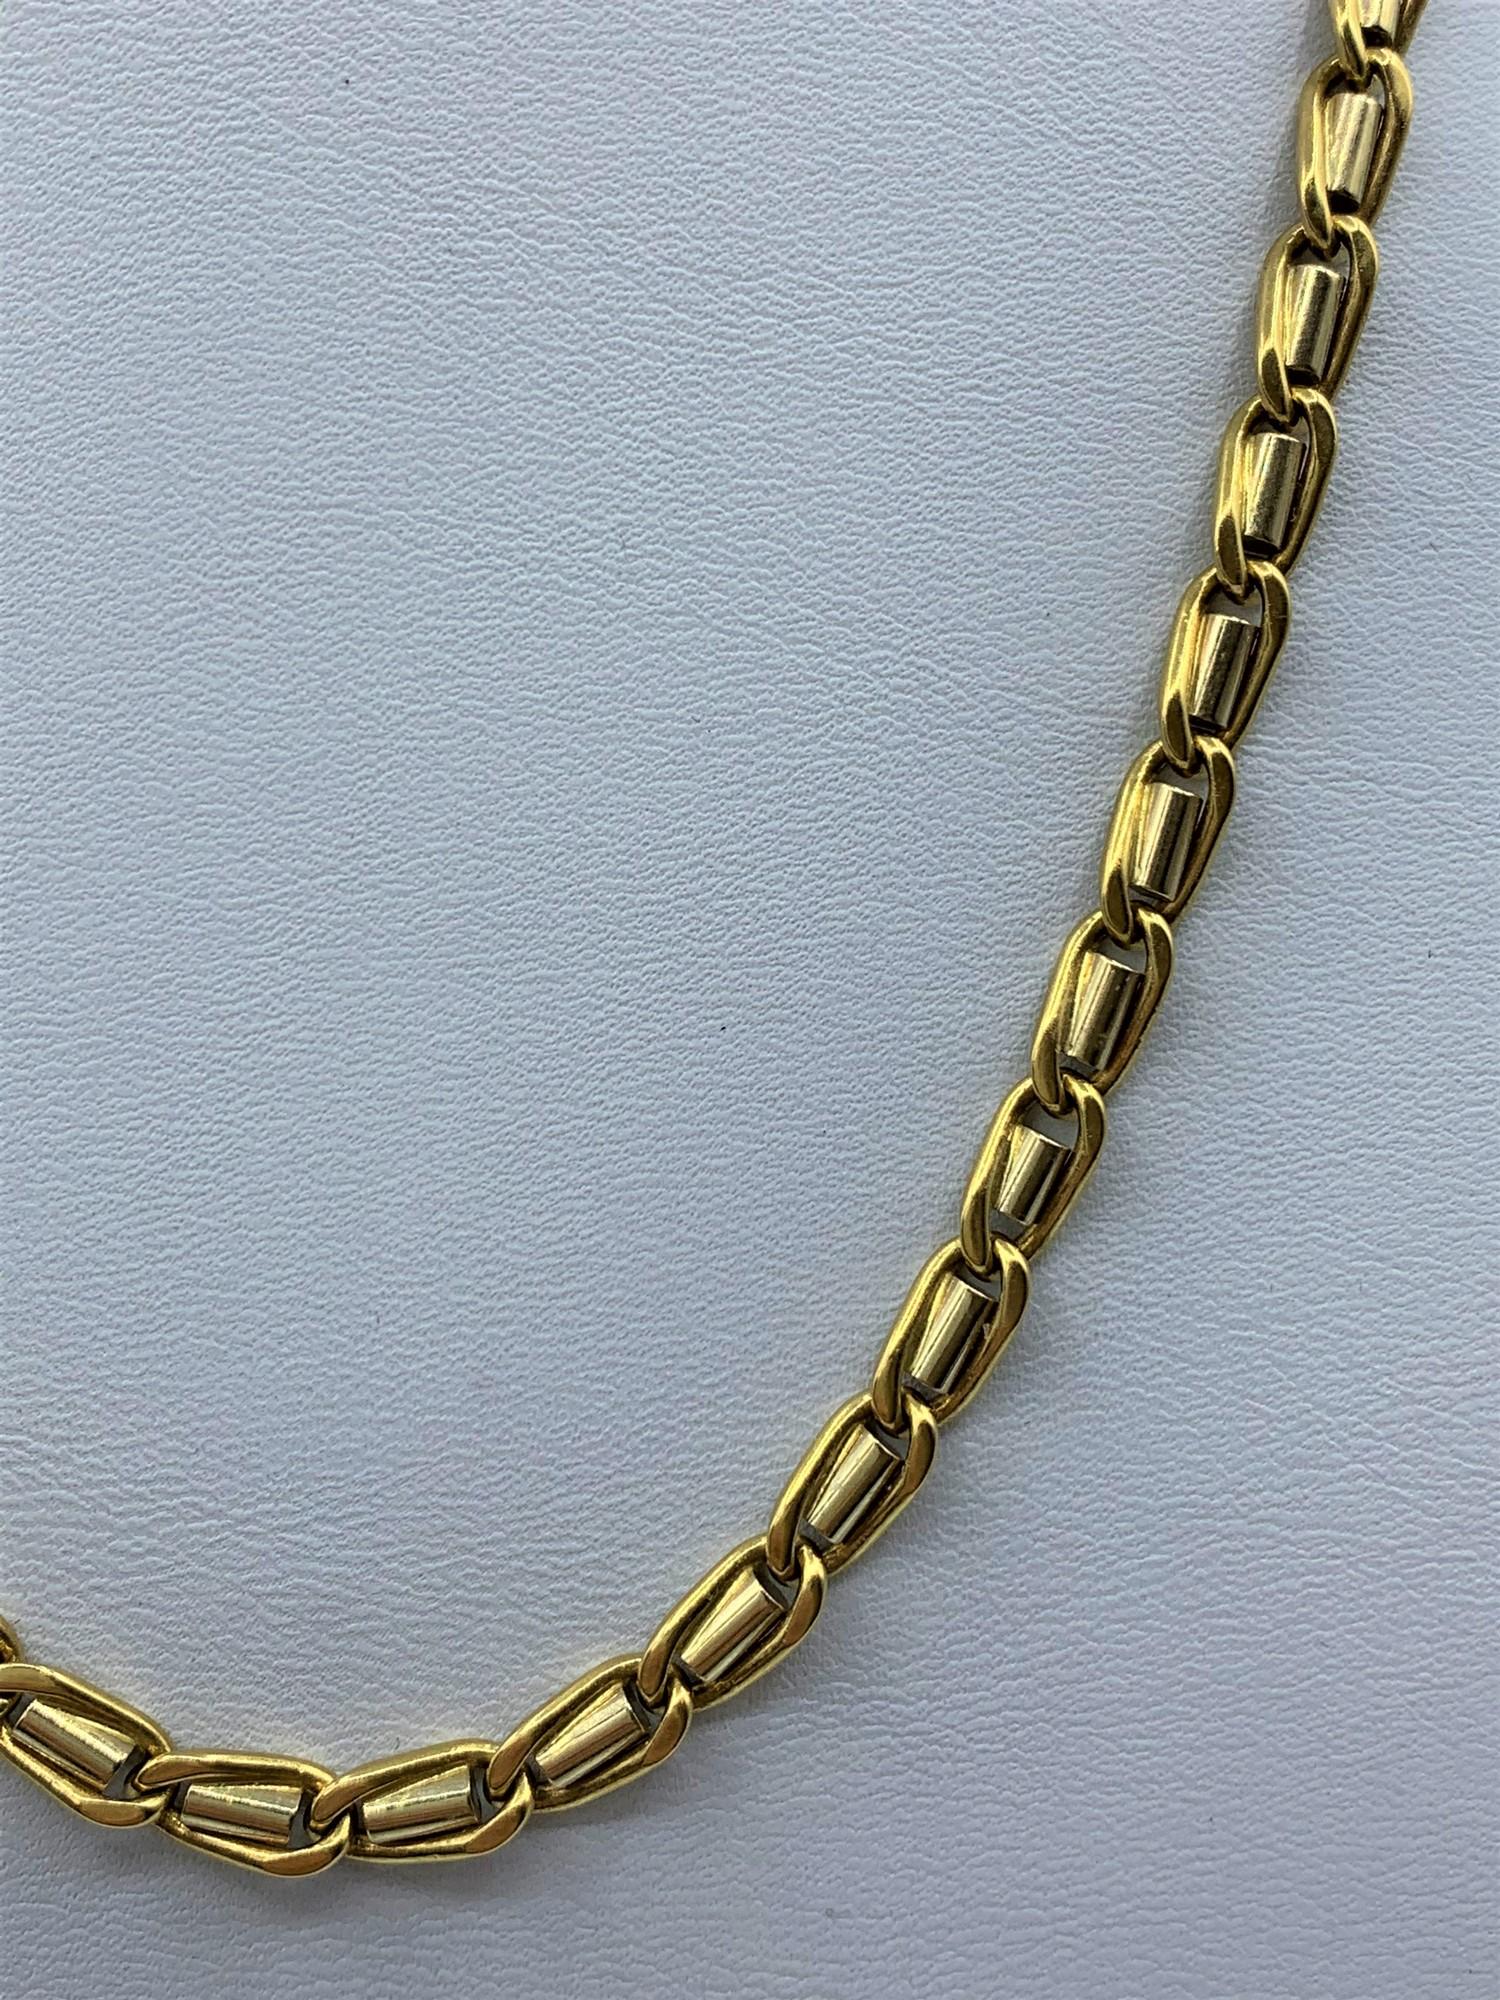 18ct yellow and white Gold designer Necklace, weight 44.7g and 42cm long - Image 7 of 20